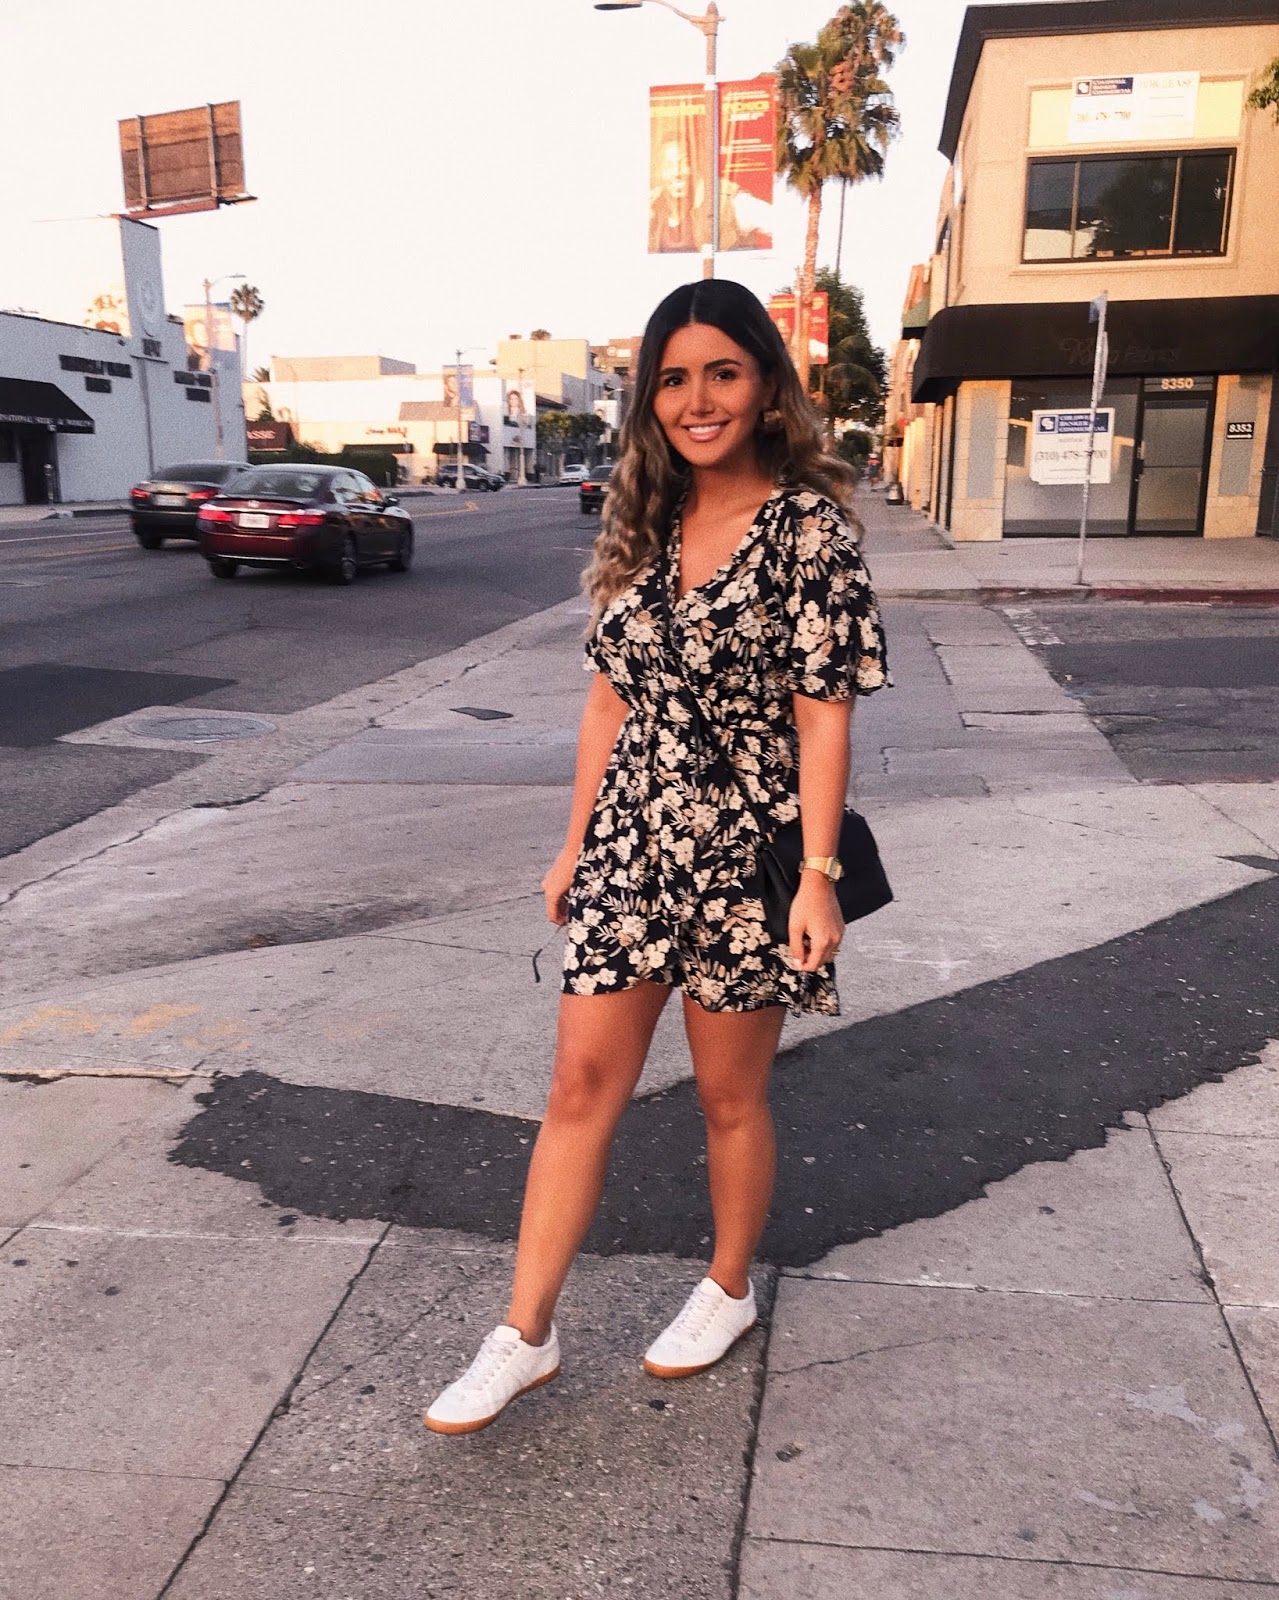 how to style, dress and sneakers outfit, floral dress, summer 2018 trends, mango crossbody, zara floral dress, dark florals, asos sneakers, affordable outfit, Pinterest, outfit idea, how I style, fashion blogger, quay Australia sunglasses, asos hoops, summer 2018 outfit, 